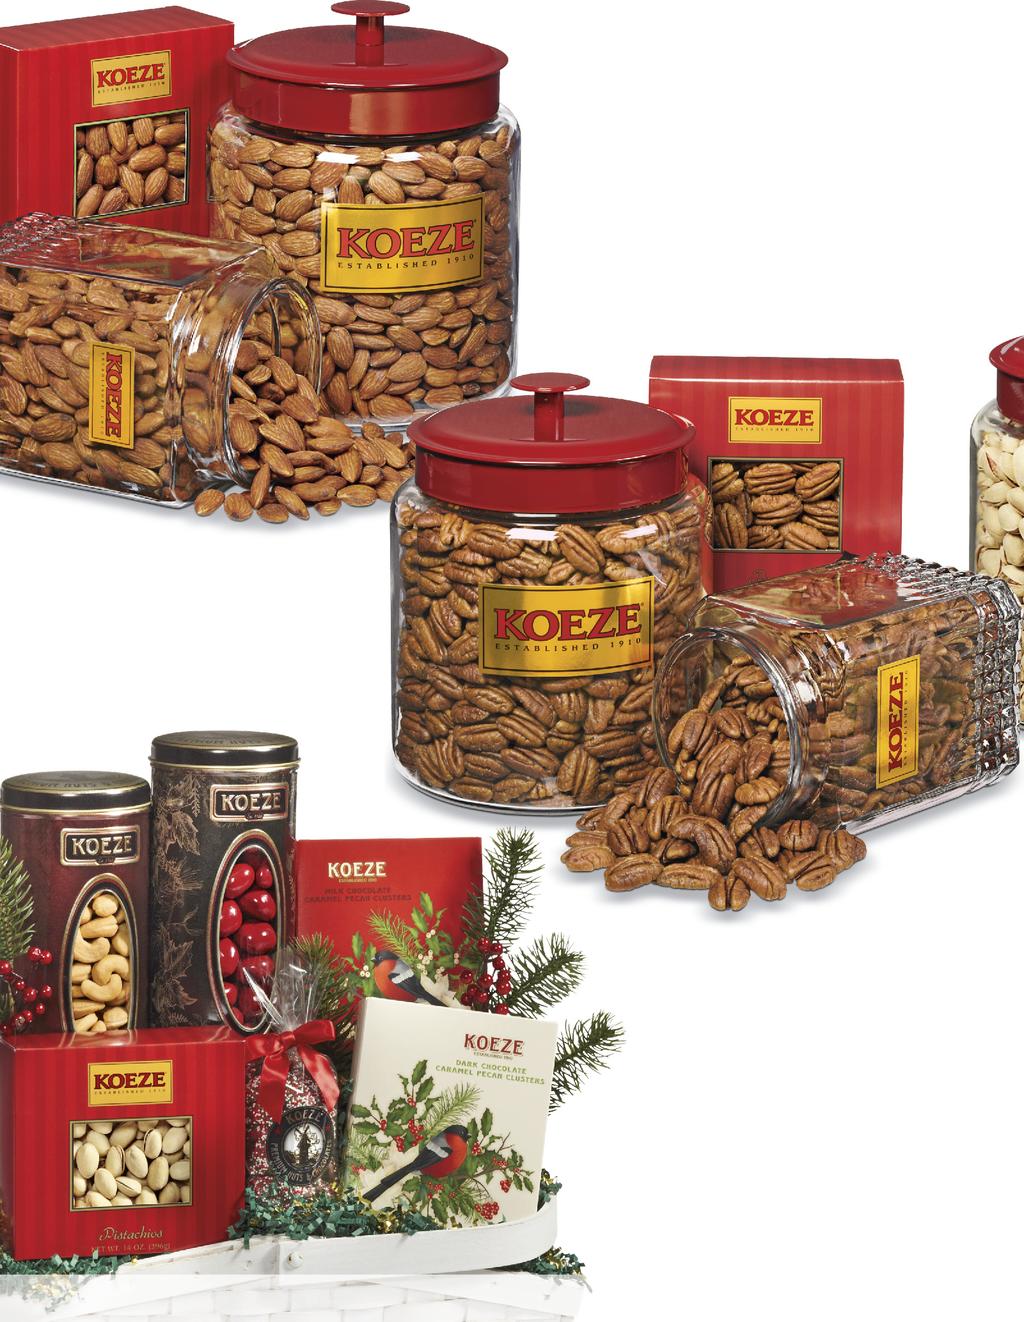 ALMONDS, PECANS KOEZE S ROASTED ALMONDS Carefully roasted and salted California almonds have starred with our cashews in Koeze s mixed nuts for decades.